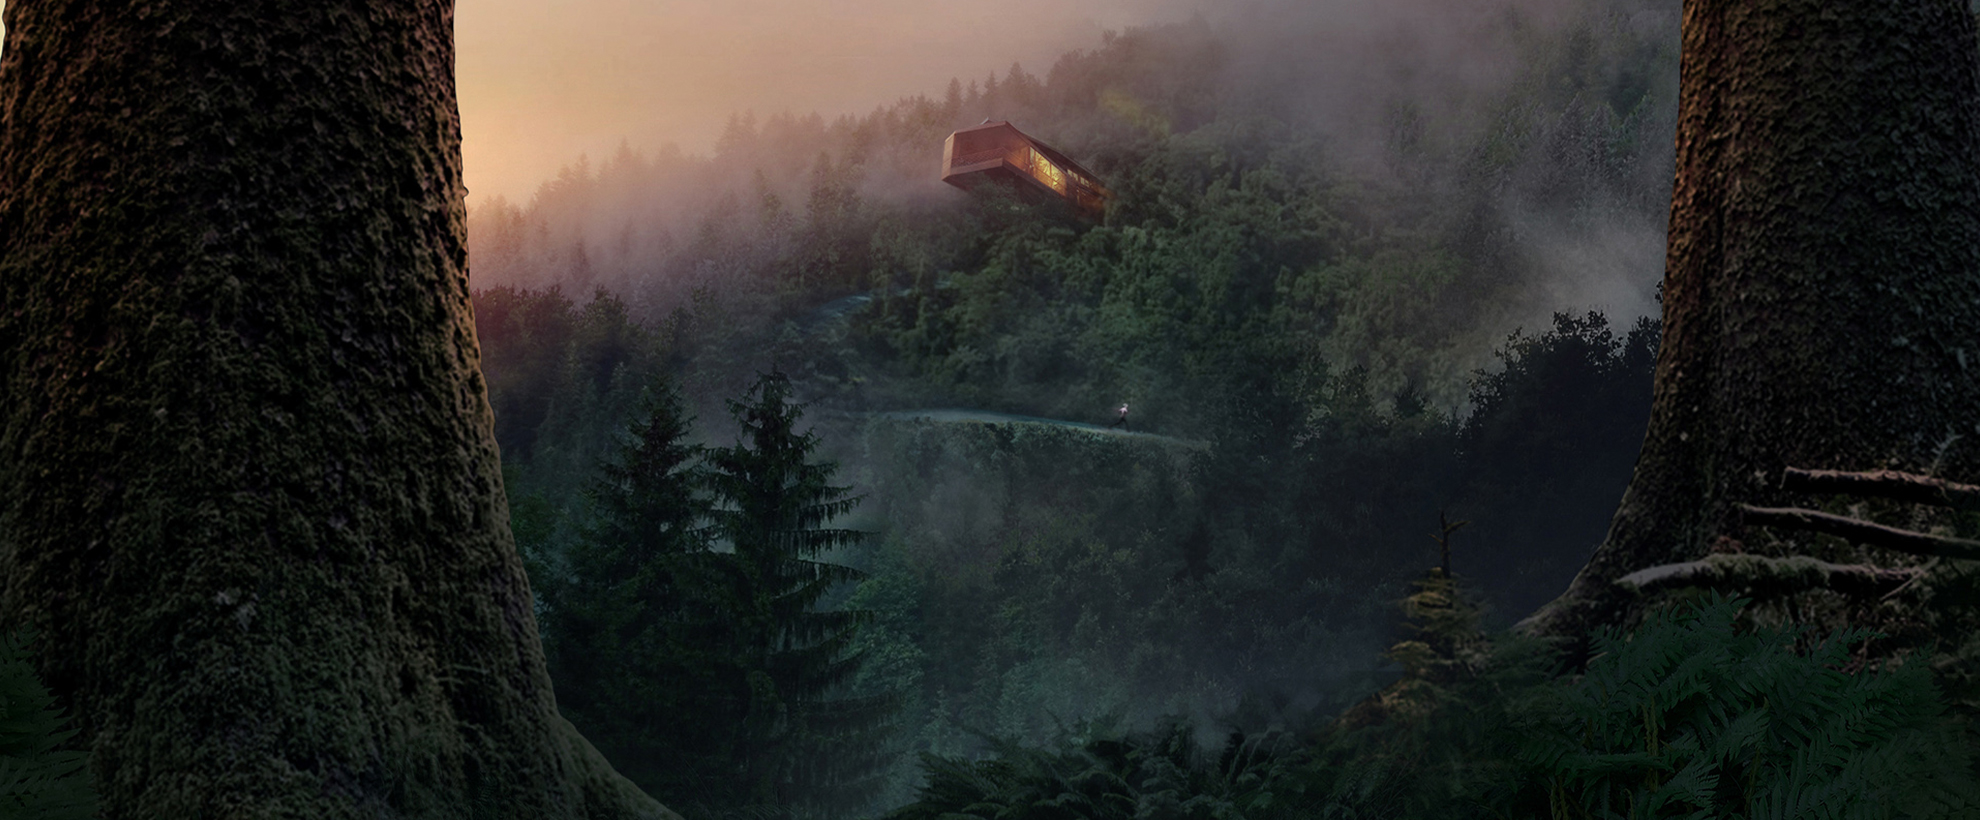 A modern rectangular house peaking out of a forested hillside in a sunset.